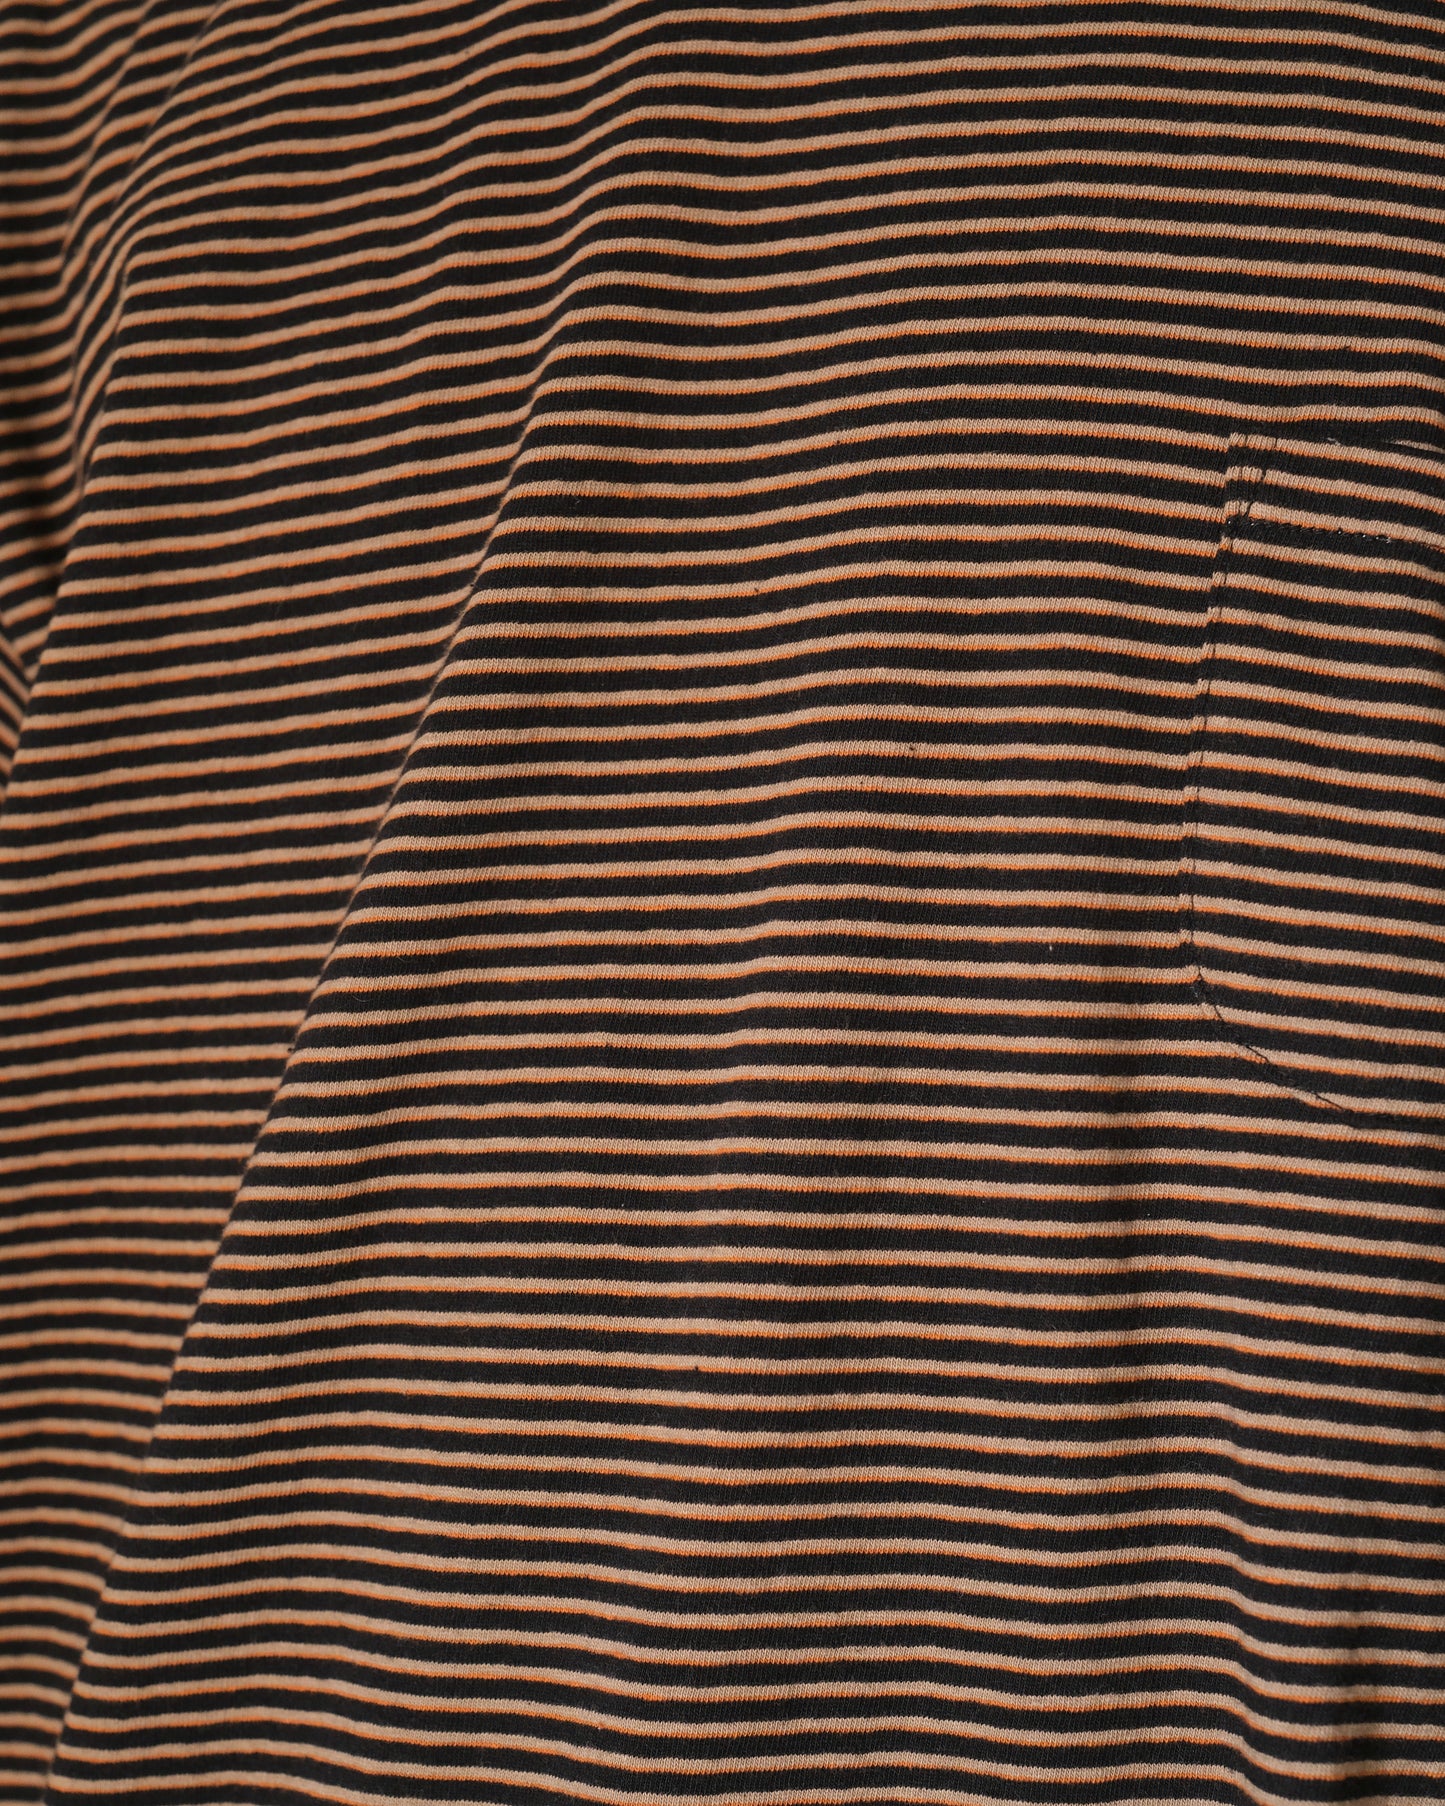 ENDS and MEANS/POCKET L/S TEE "BLACK STRIPE"